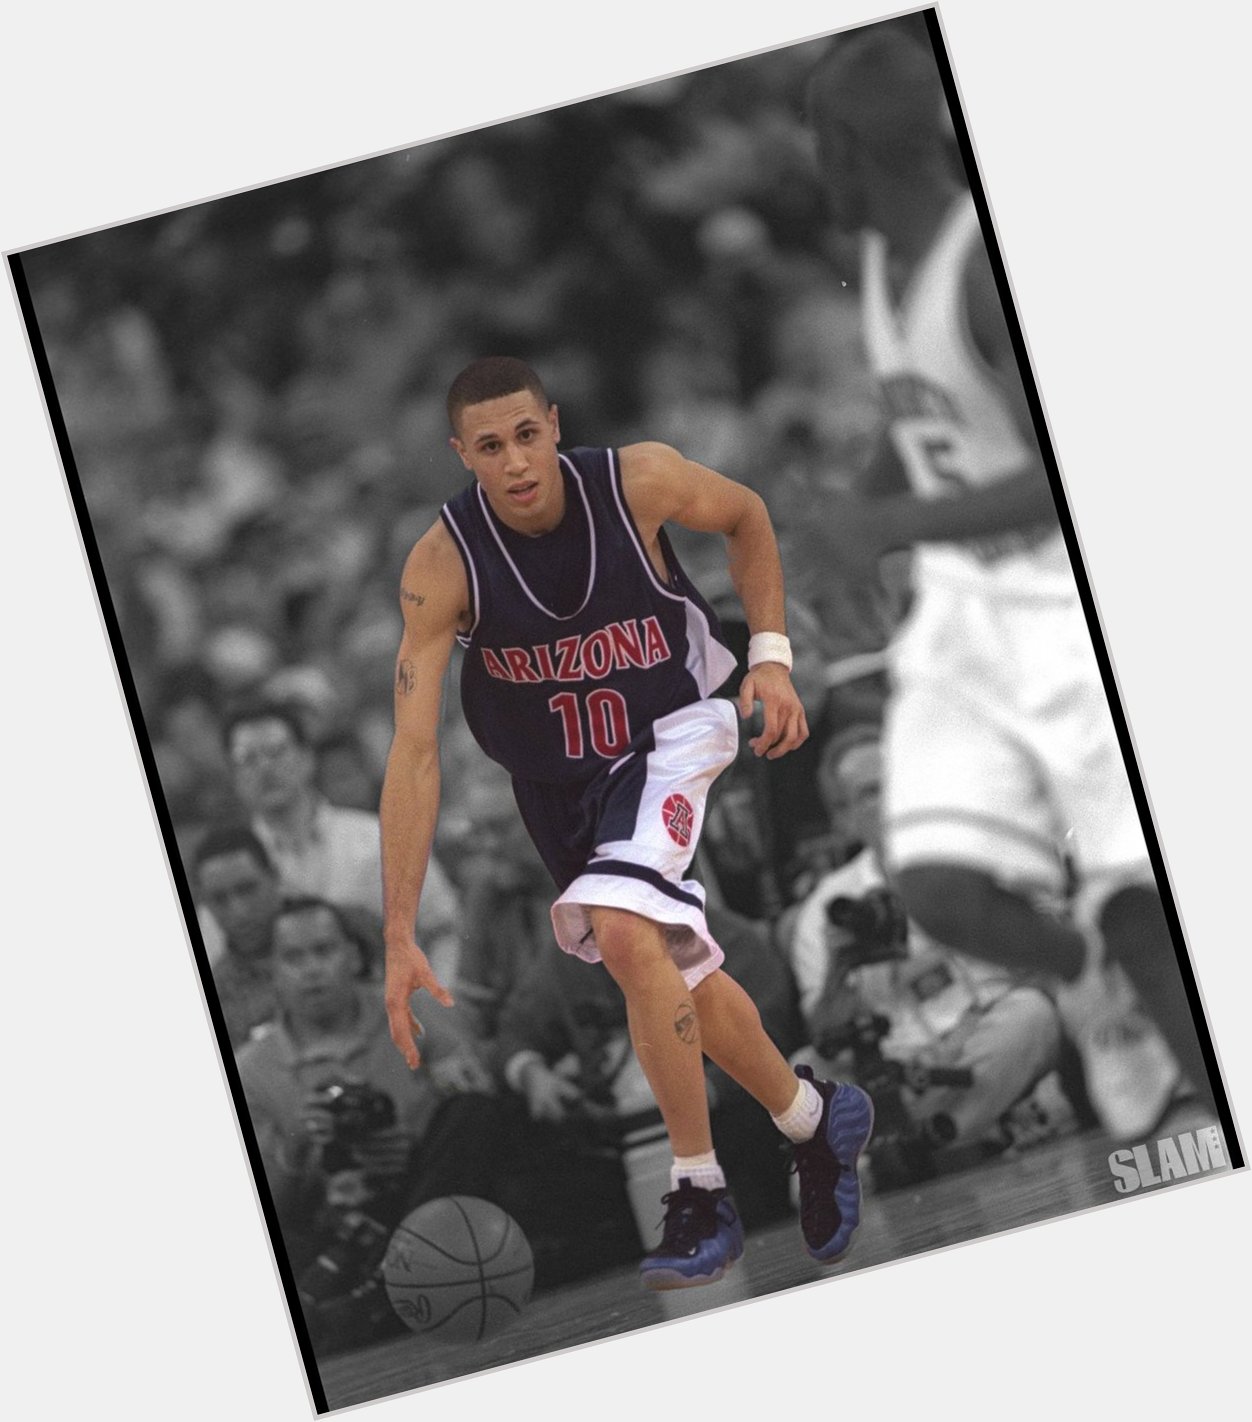 Wore the Pennys before Penny. Happy birthday, Mike Bibby. 